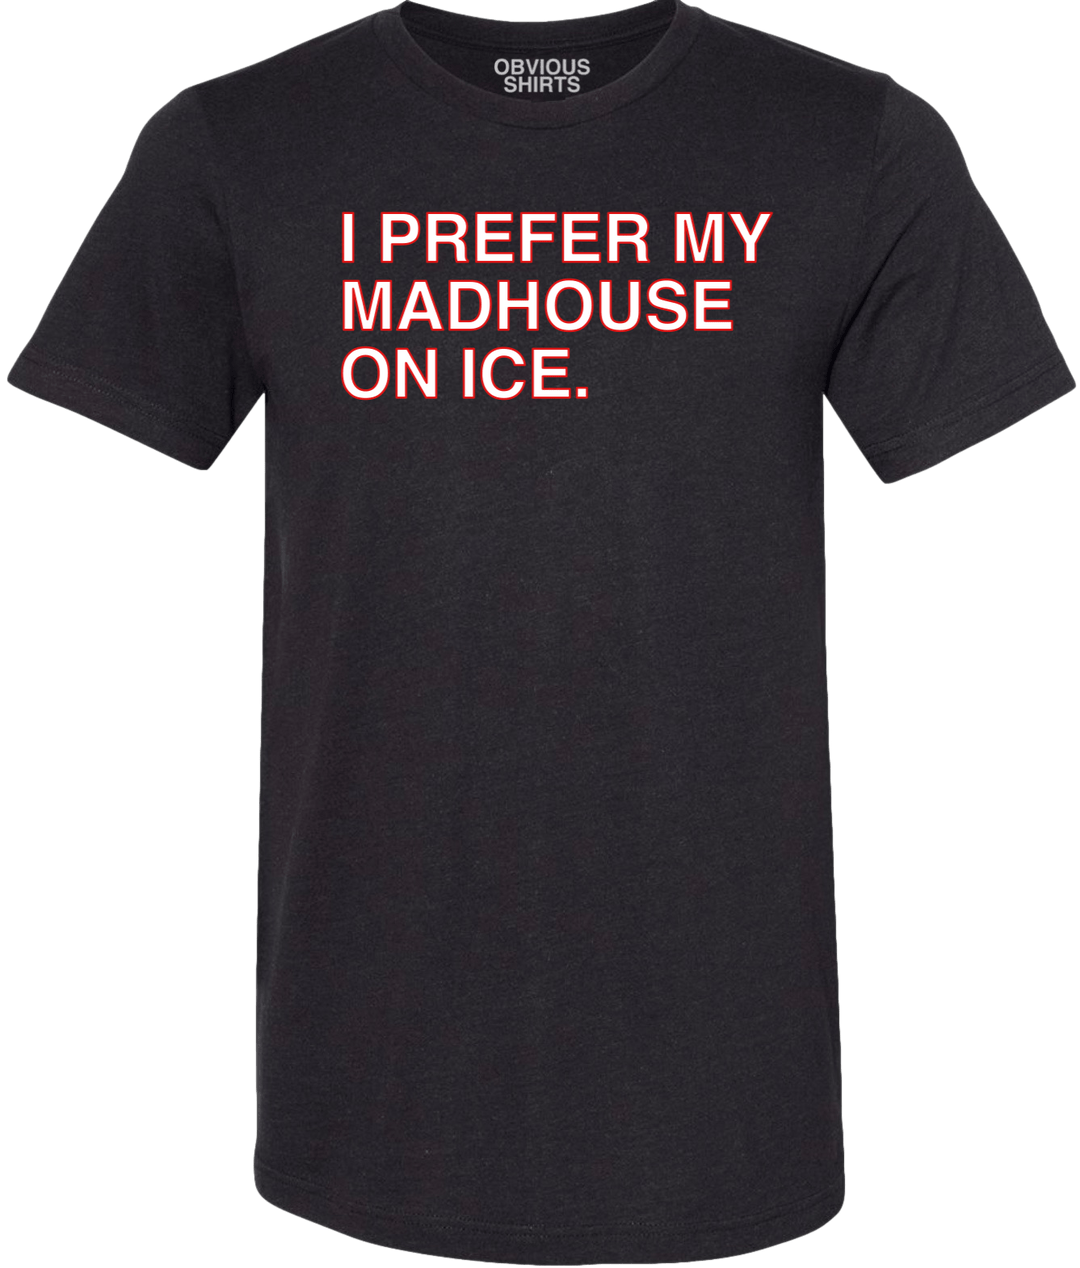 I PREFER MY MADHOUSE ON ICE. (BLACK) - OBVIOUS SHIRTS